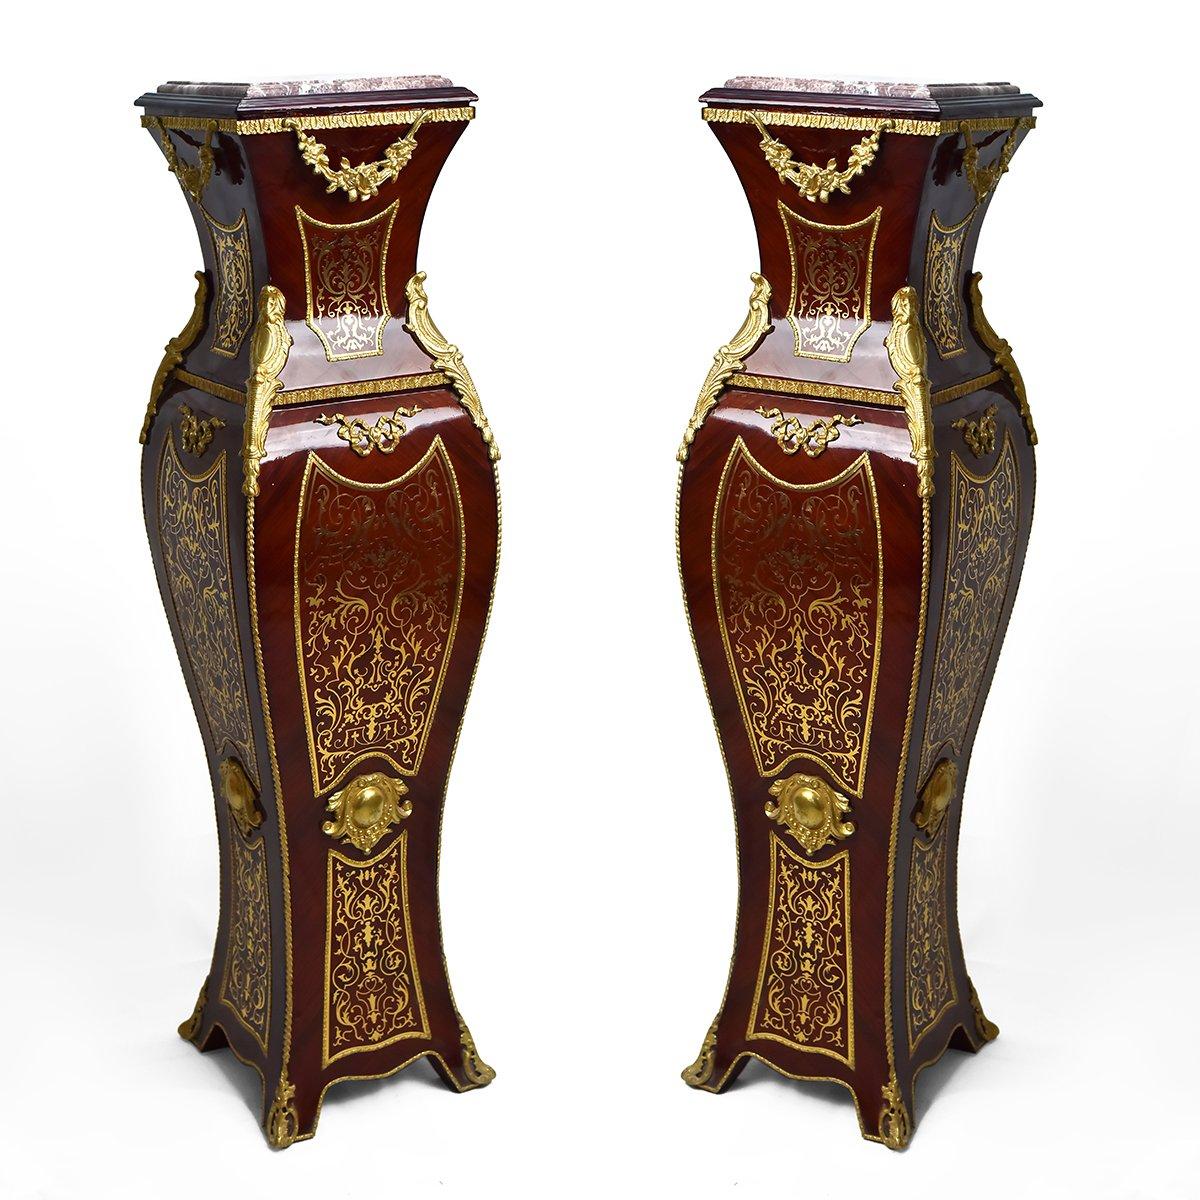 A stunning French Louis style Boulle pedestal (2 set), 20th century.

In the 18th century, a symmetrical, lighter, and smaller style were published, called Louis XV style. This Louis XV furniture’s style was a burst at its time because it wasn’t